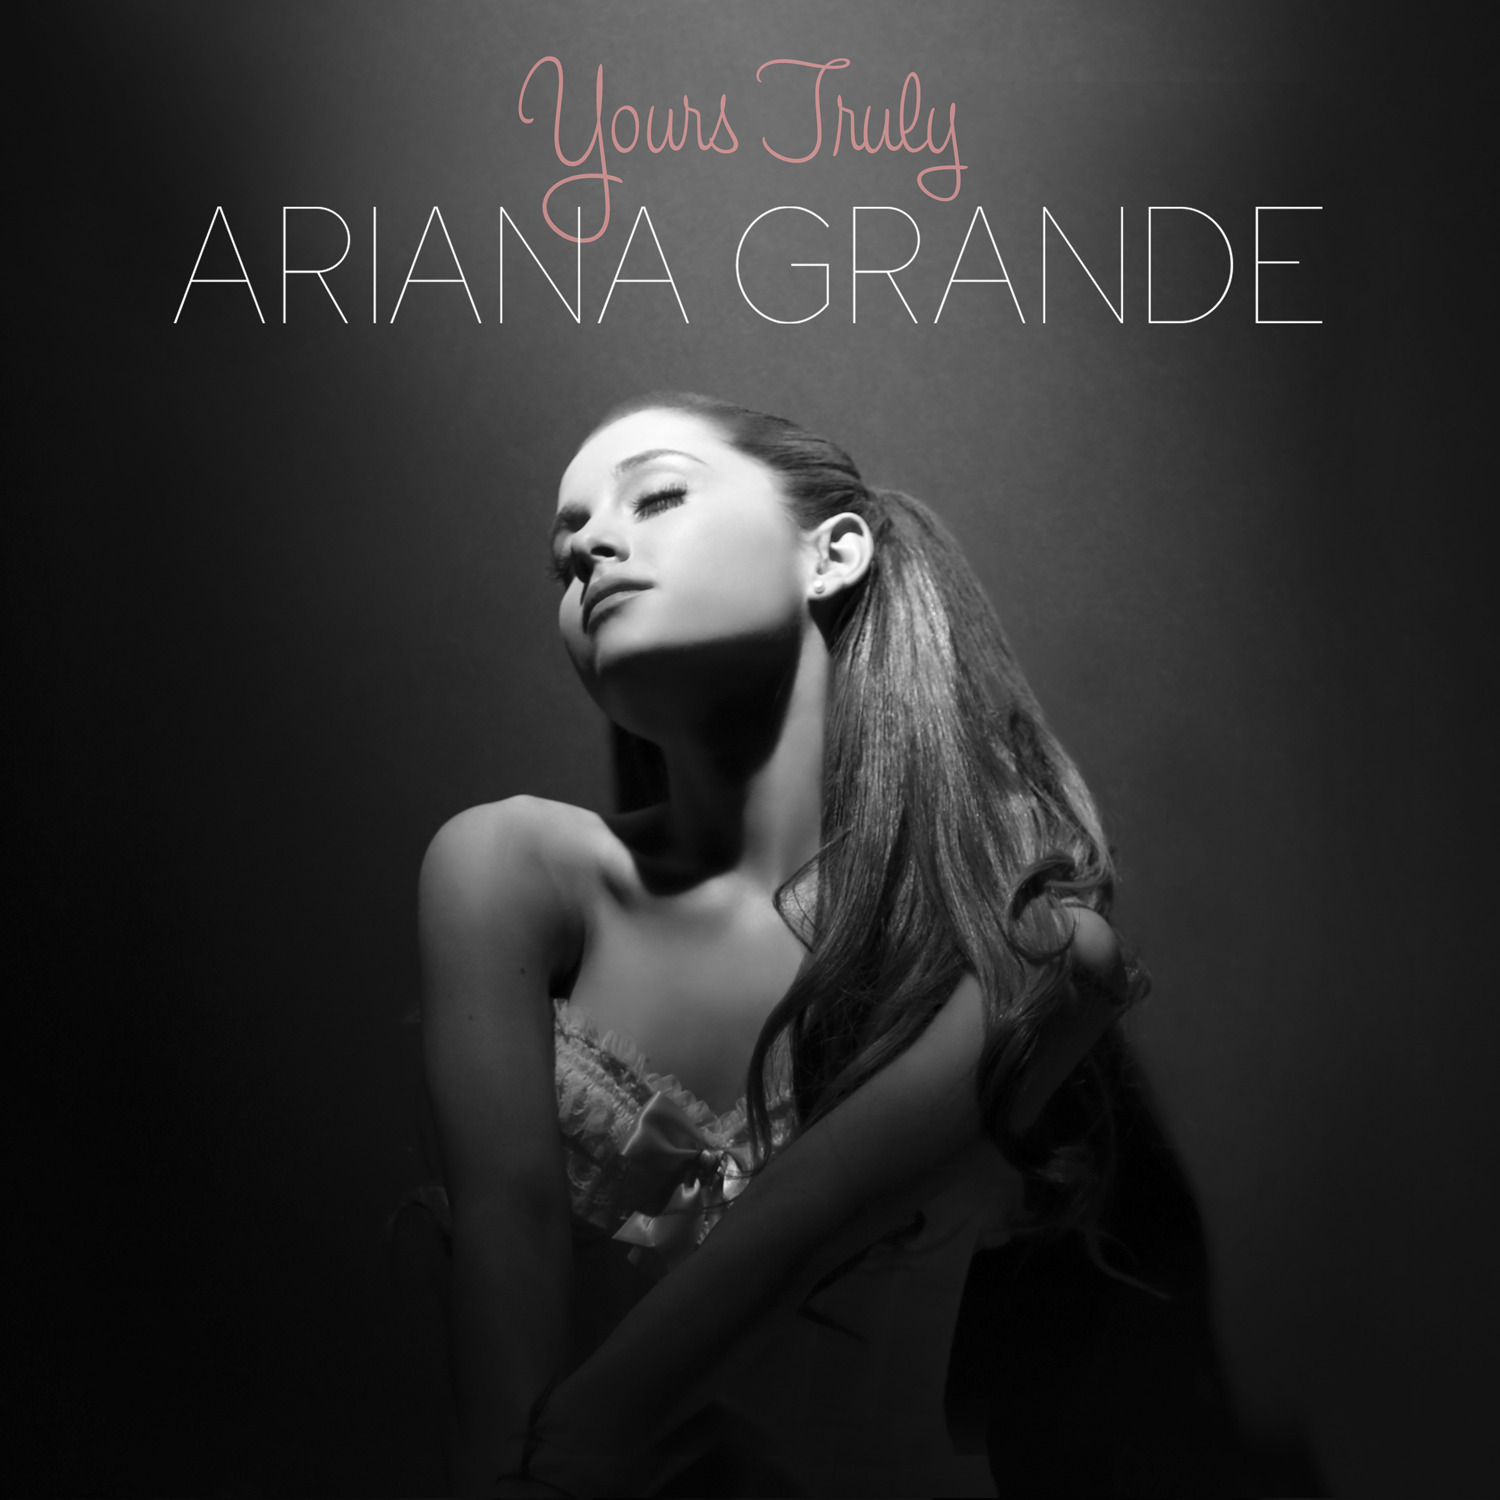 Ariana Grande Album Cover Background, Ariana Grande Black And White Picture  Background Image And Wallpaper for Free Download